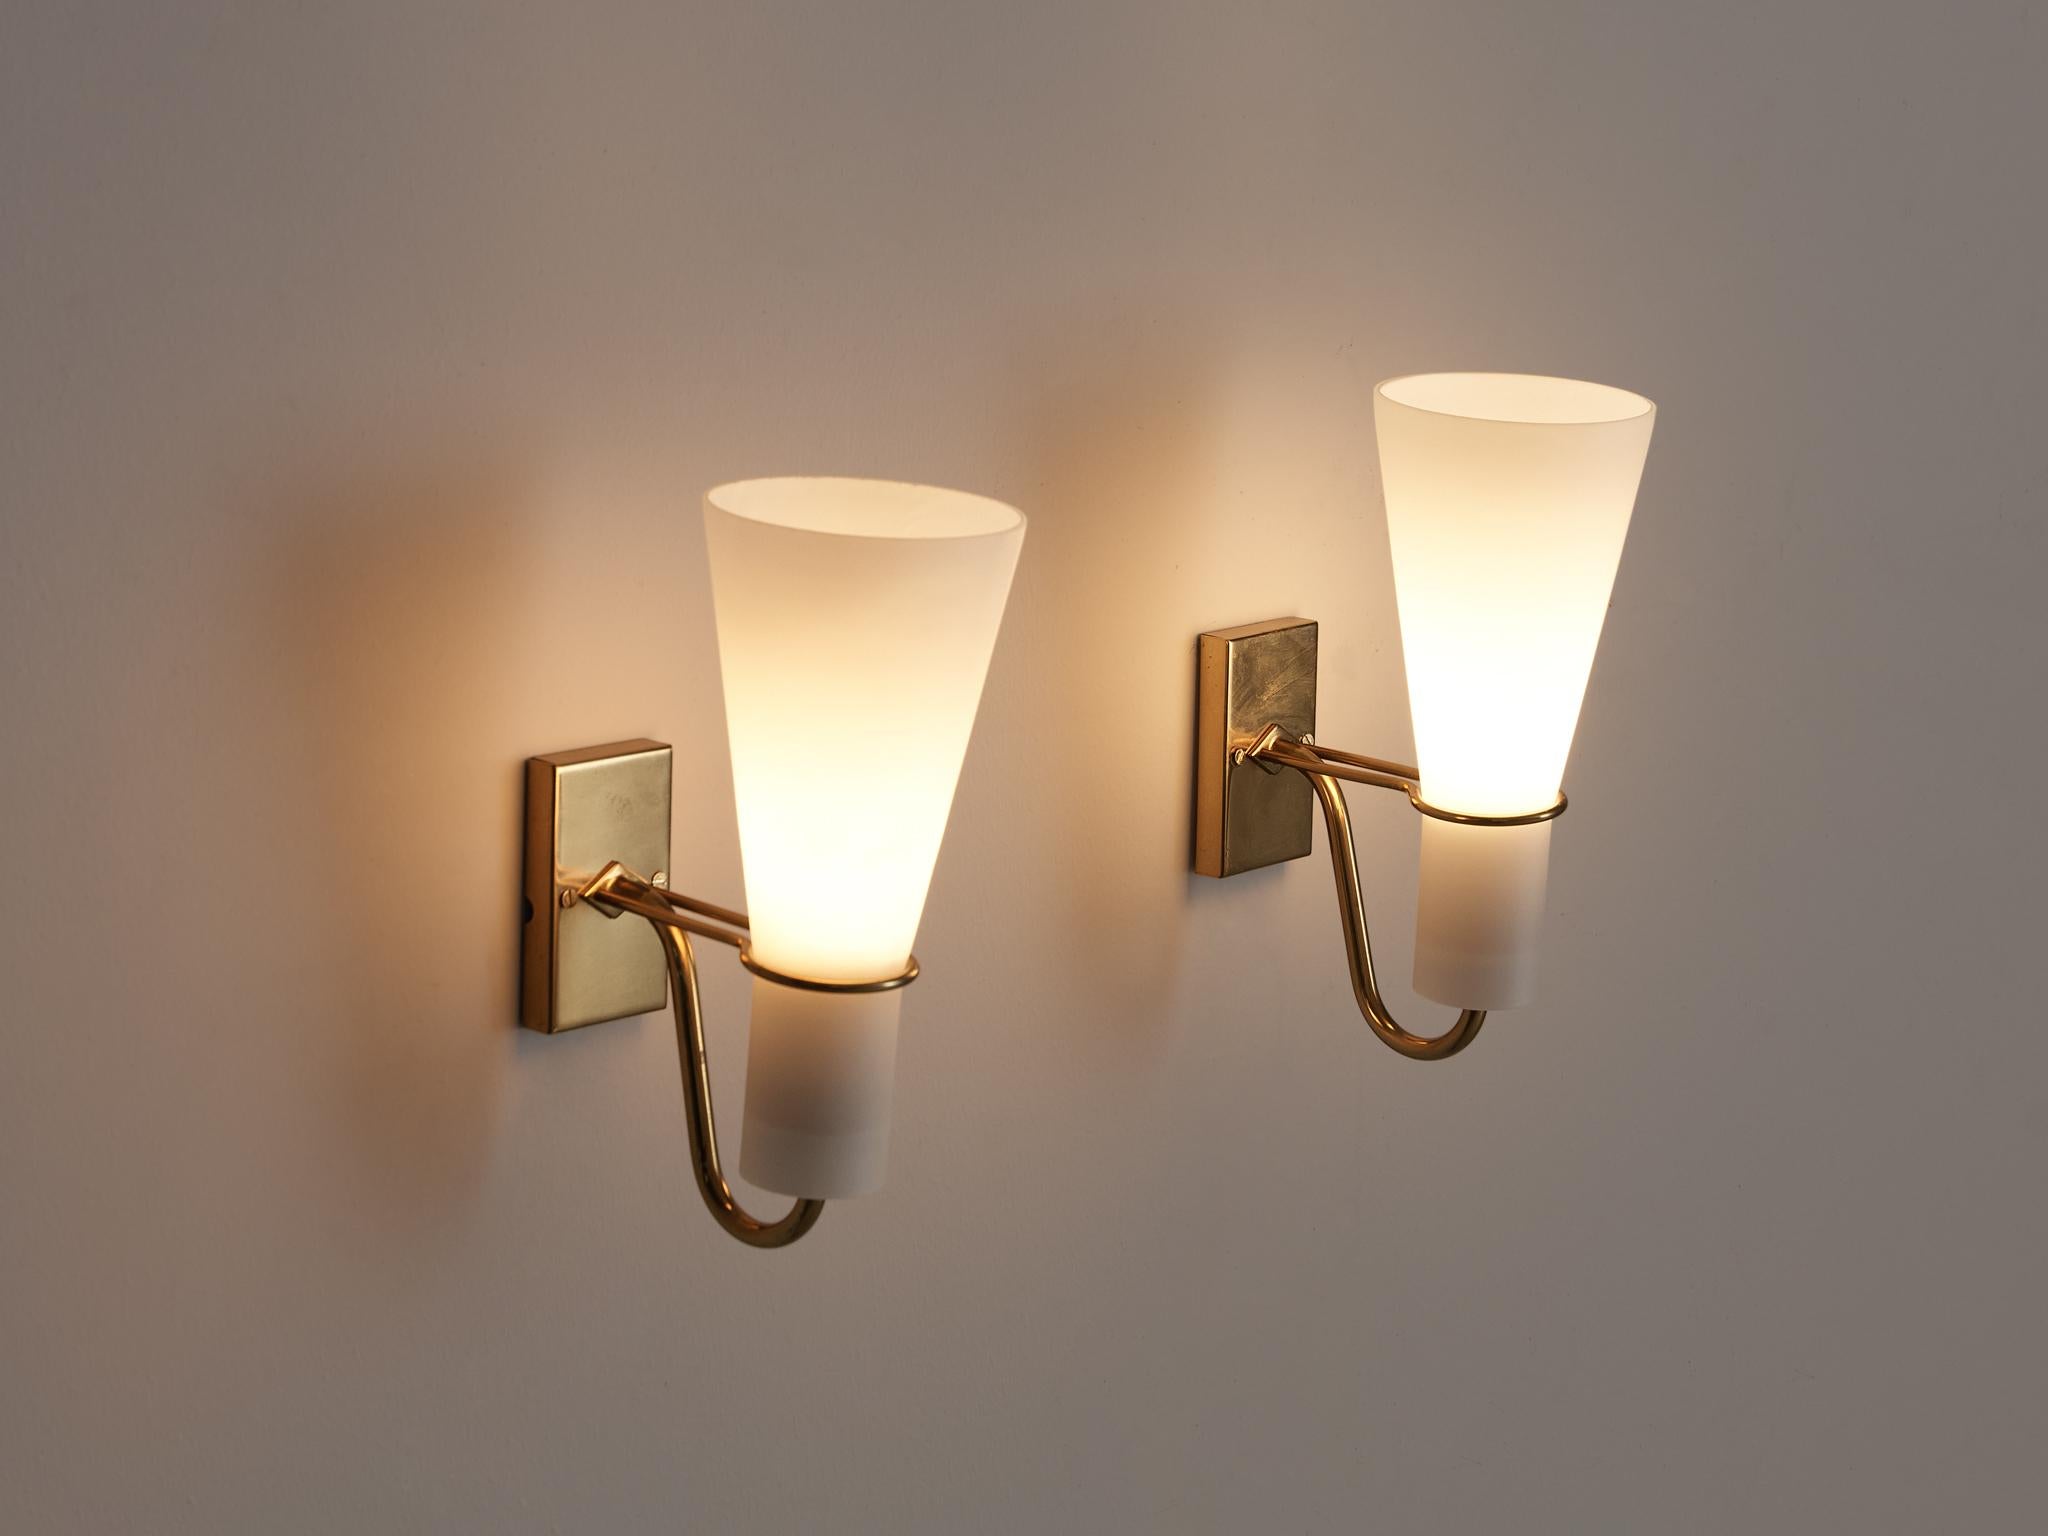 Hans Bergström for ASEA Belysning, wall lights, brass, matted glass, Sweden, 1950s

These cone-shaped wall lights are held by filigree brass details ending in a small rectangular plate. Due to the matted glass the light gets smooth and cozy. The